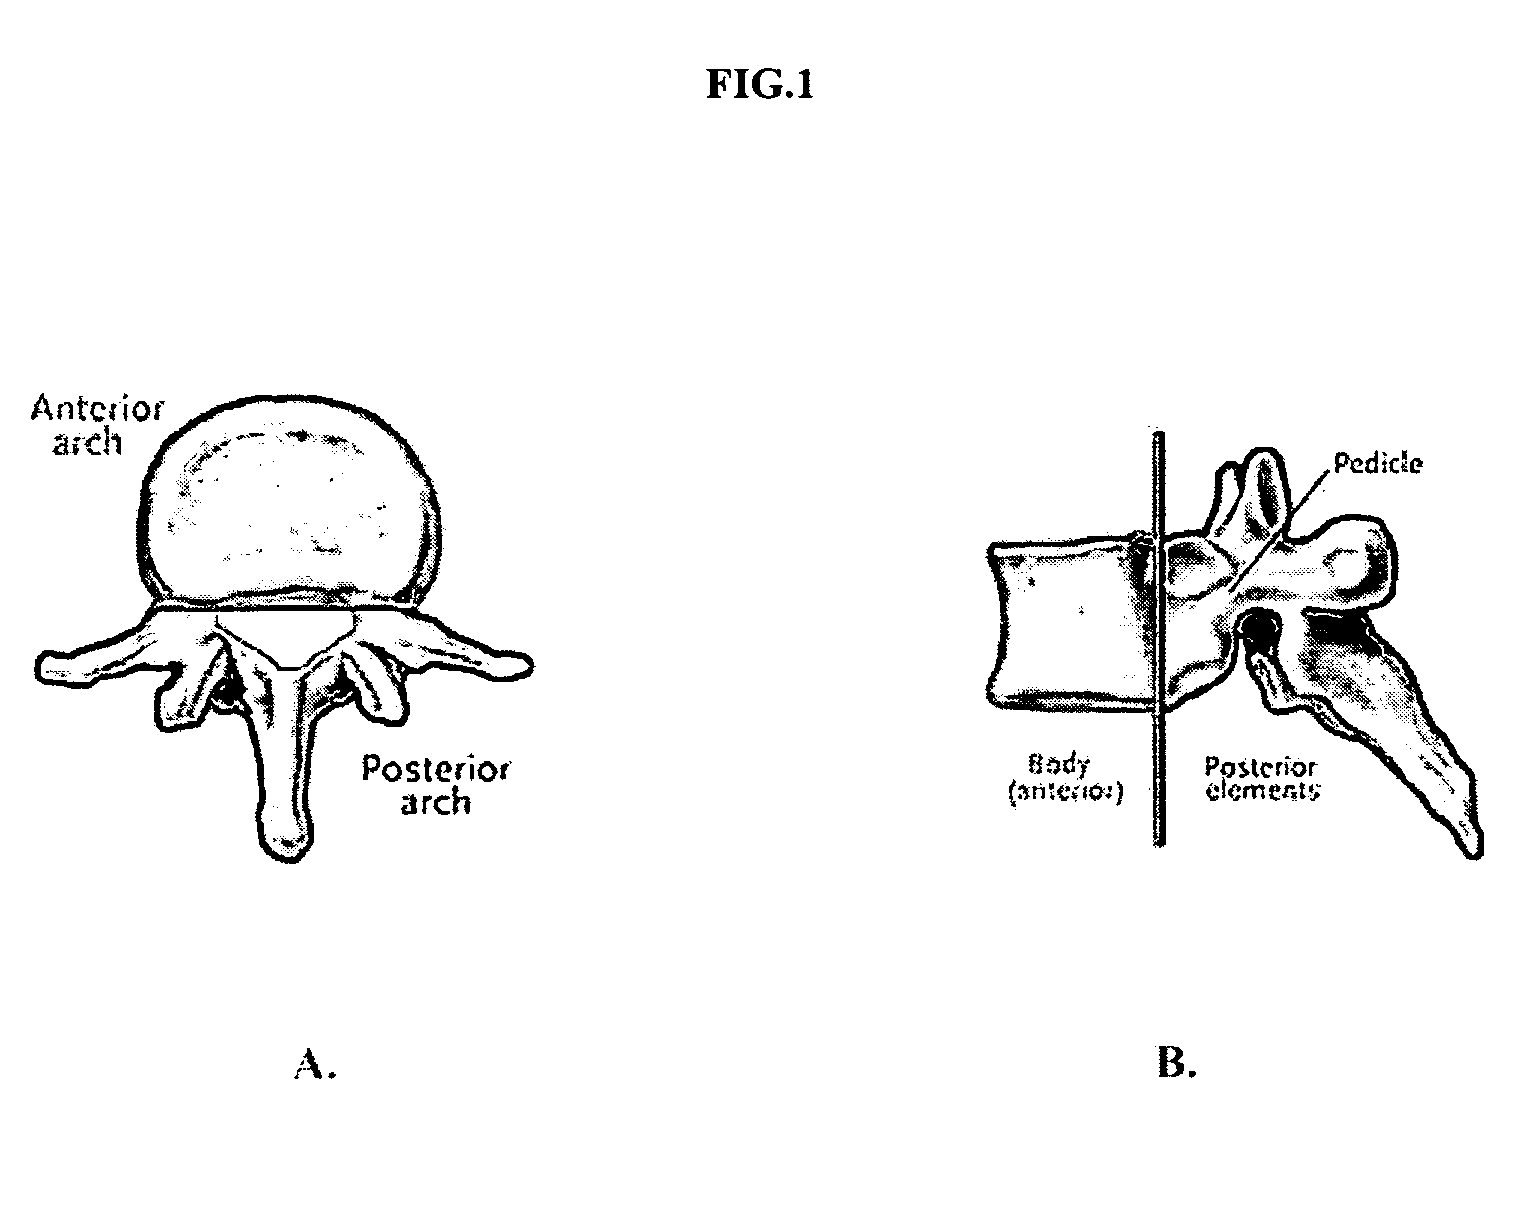 Methods of employing calcium phosphate cement compositions and osteoinductive proteins to effect vertebrae interbody fusion absent an interbody device